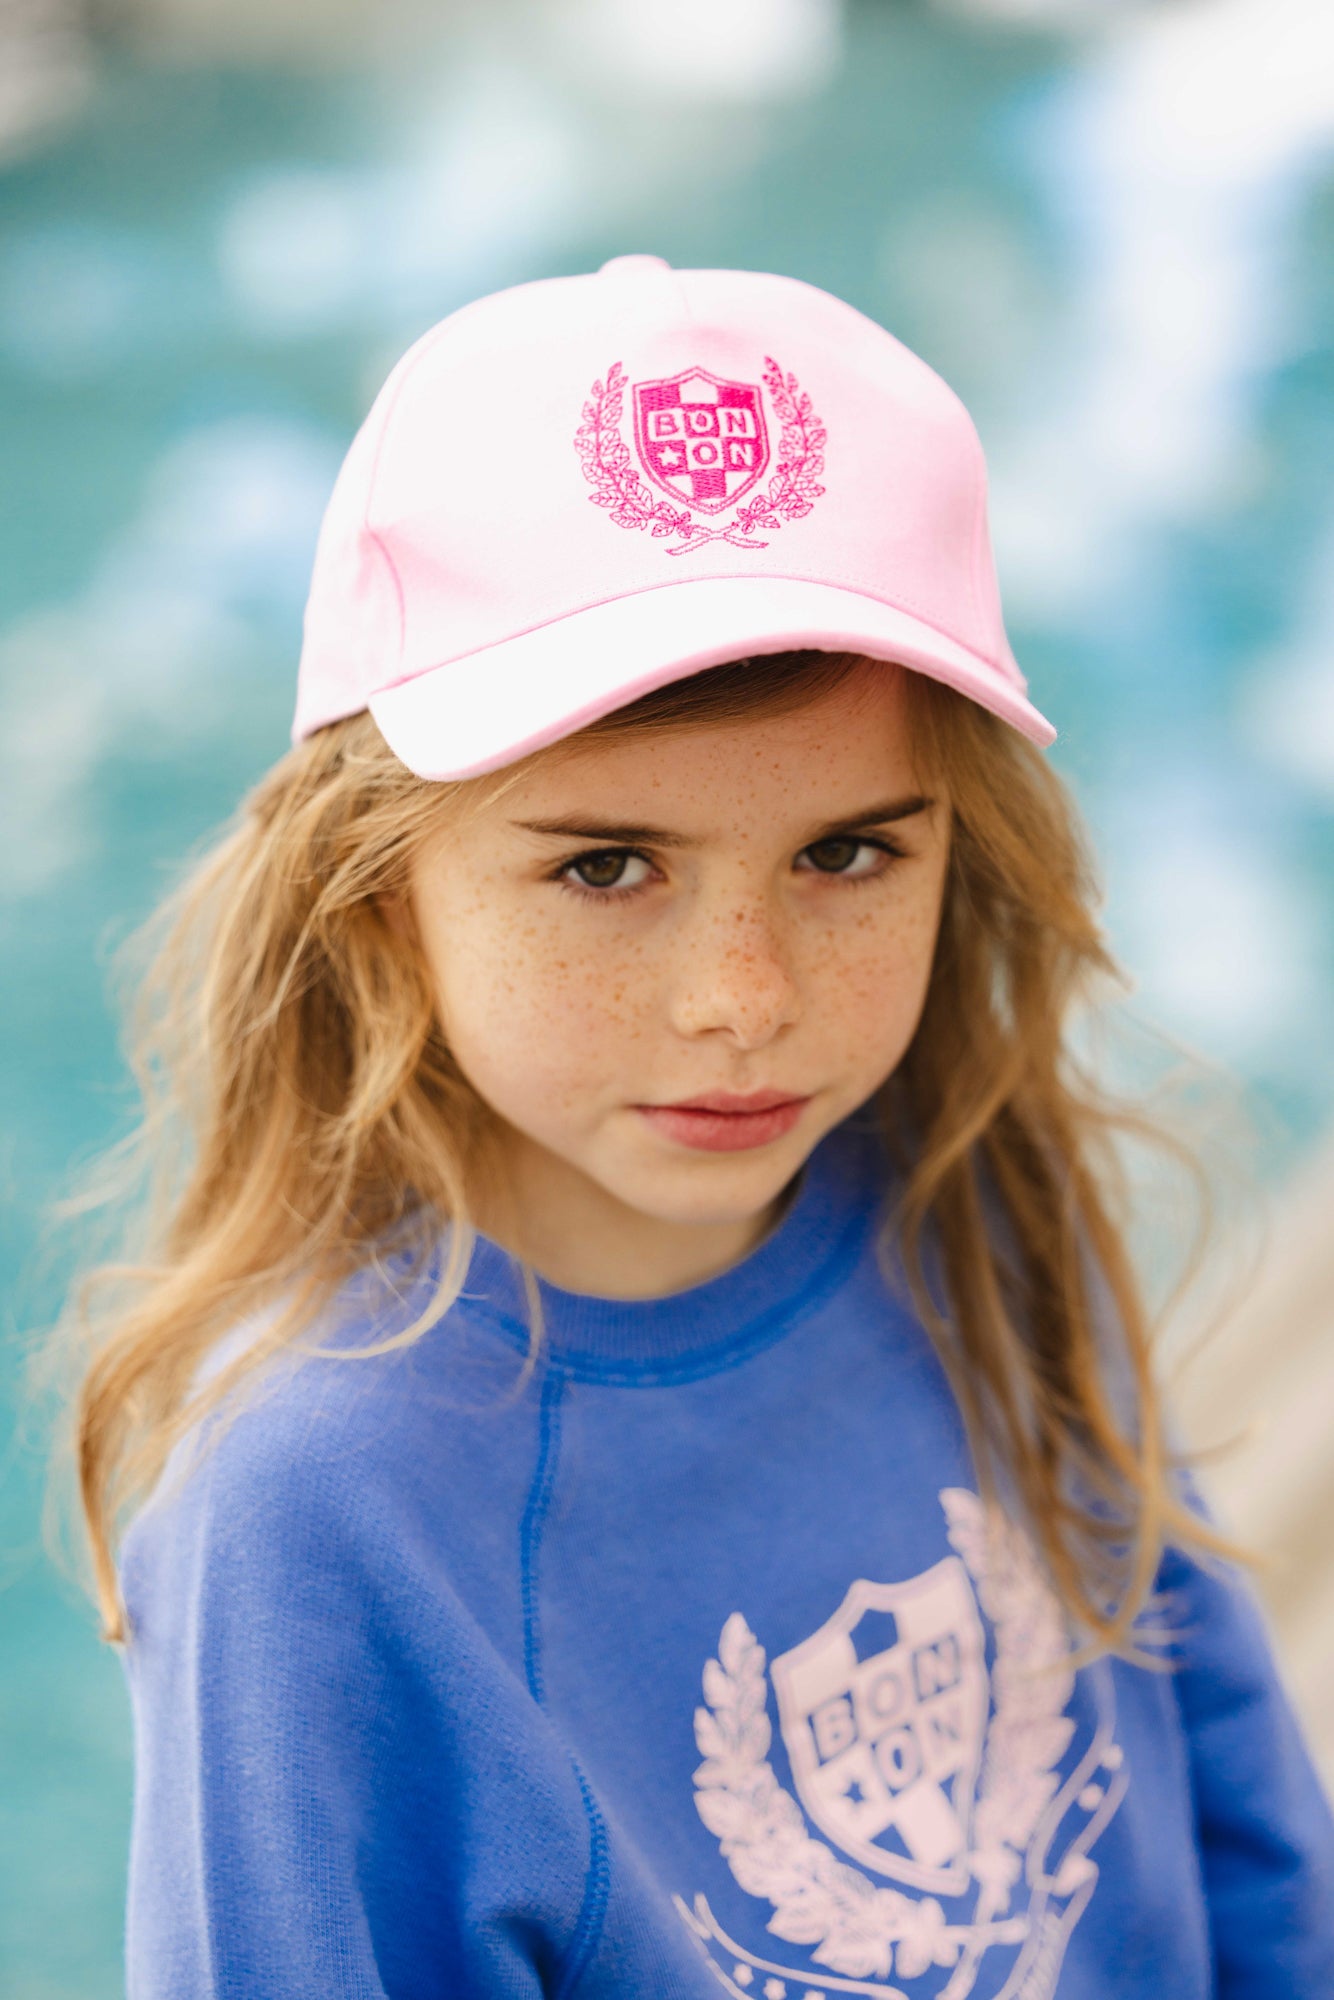 Cap - Mona Pink embroidered cotton